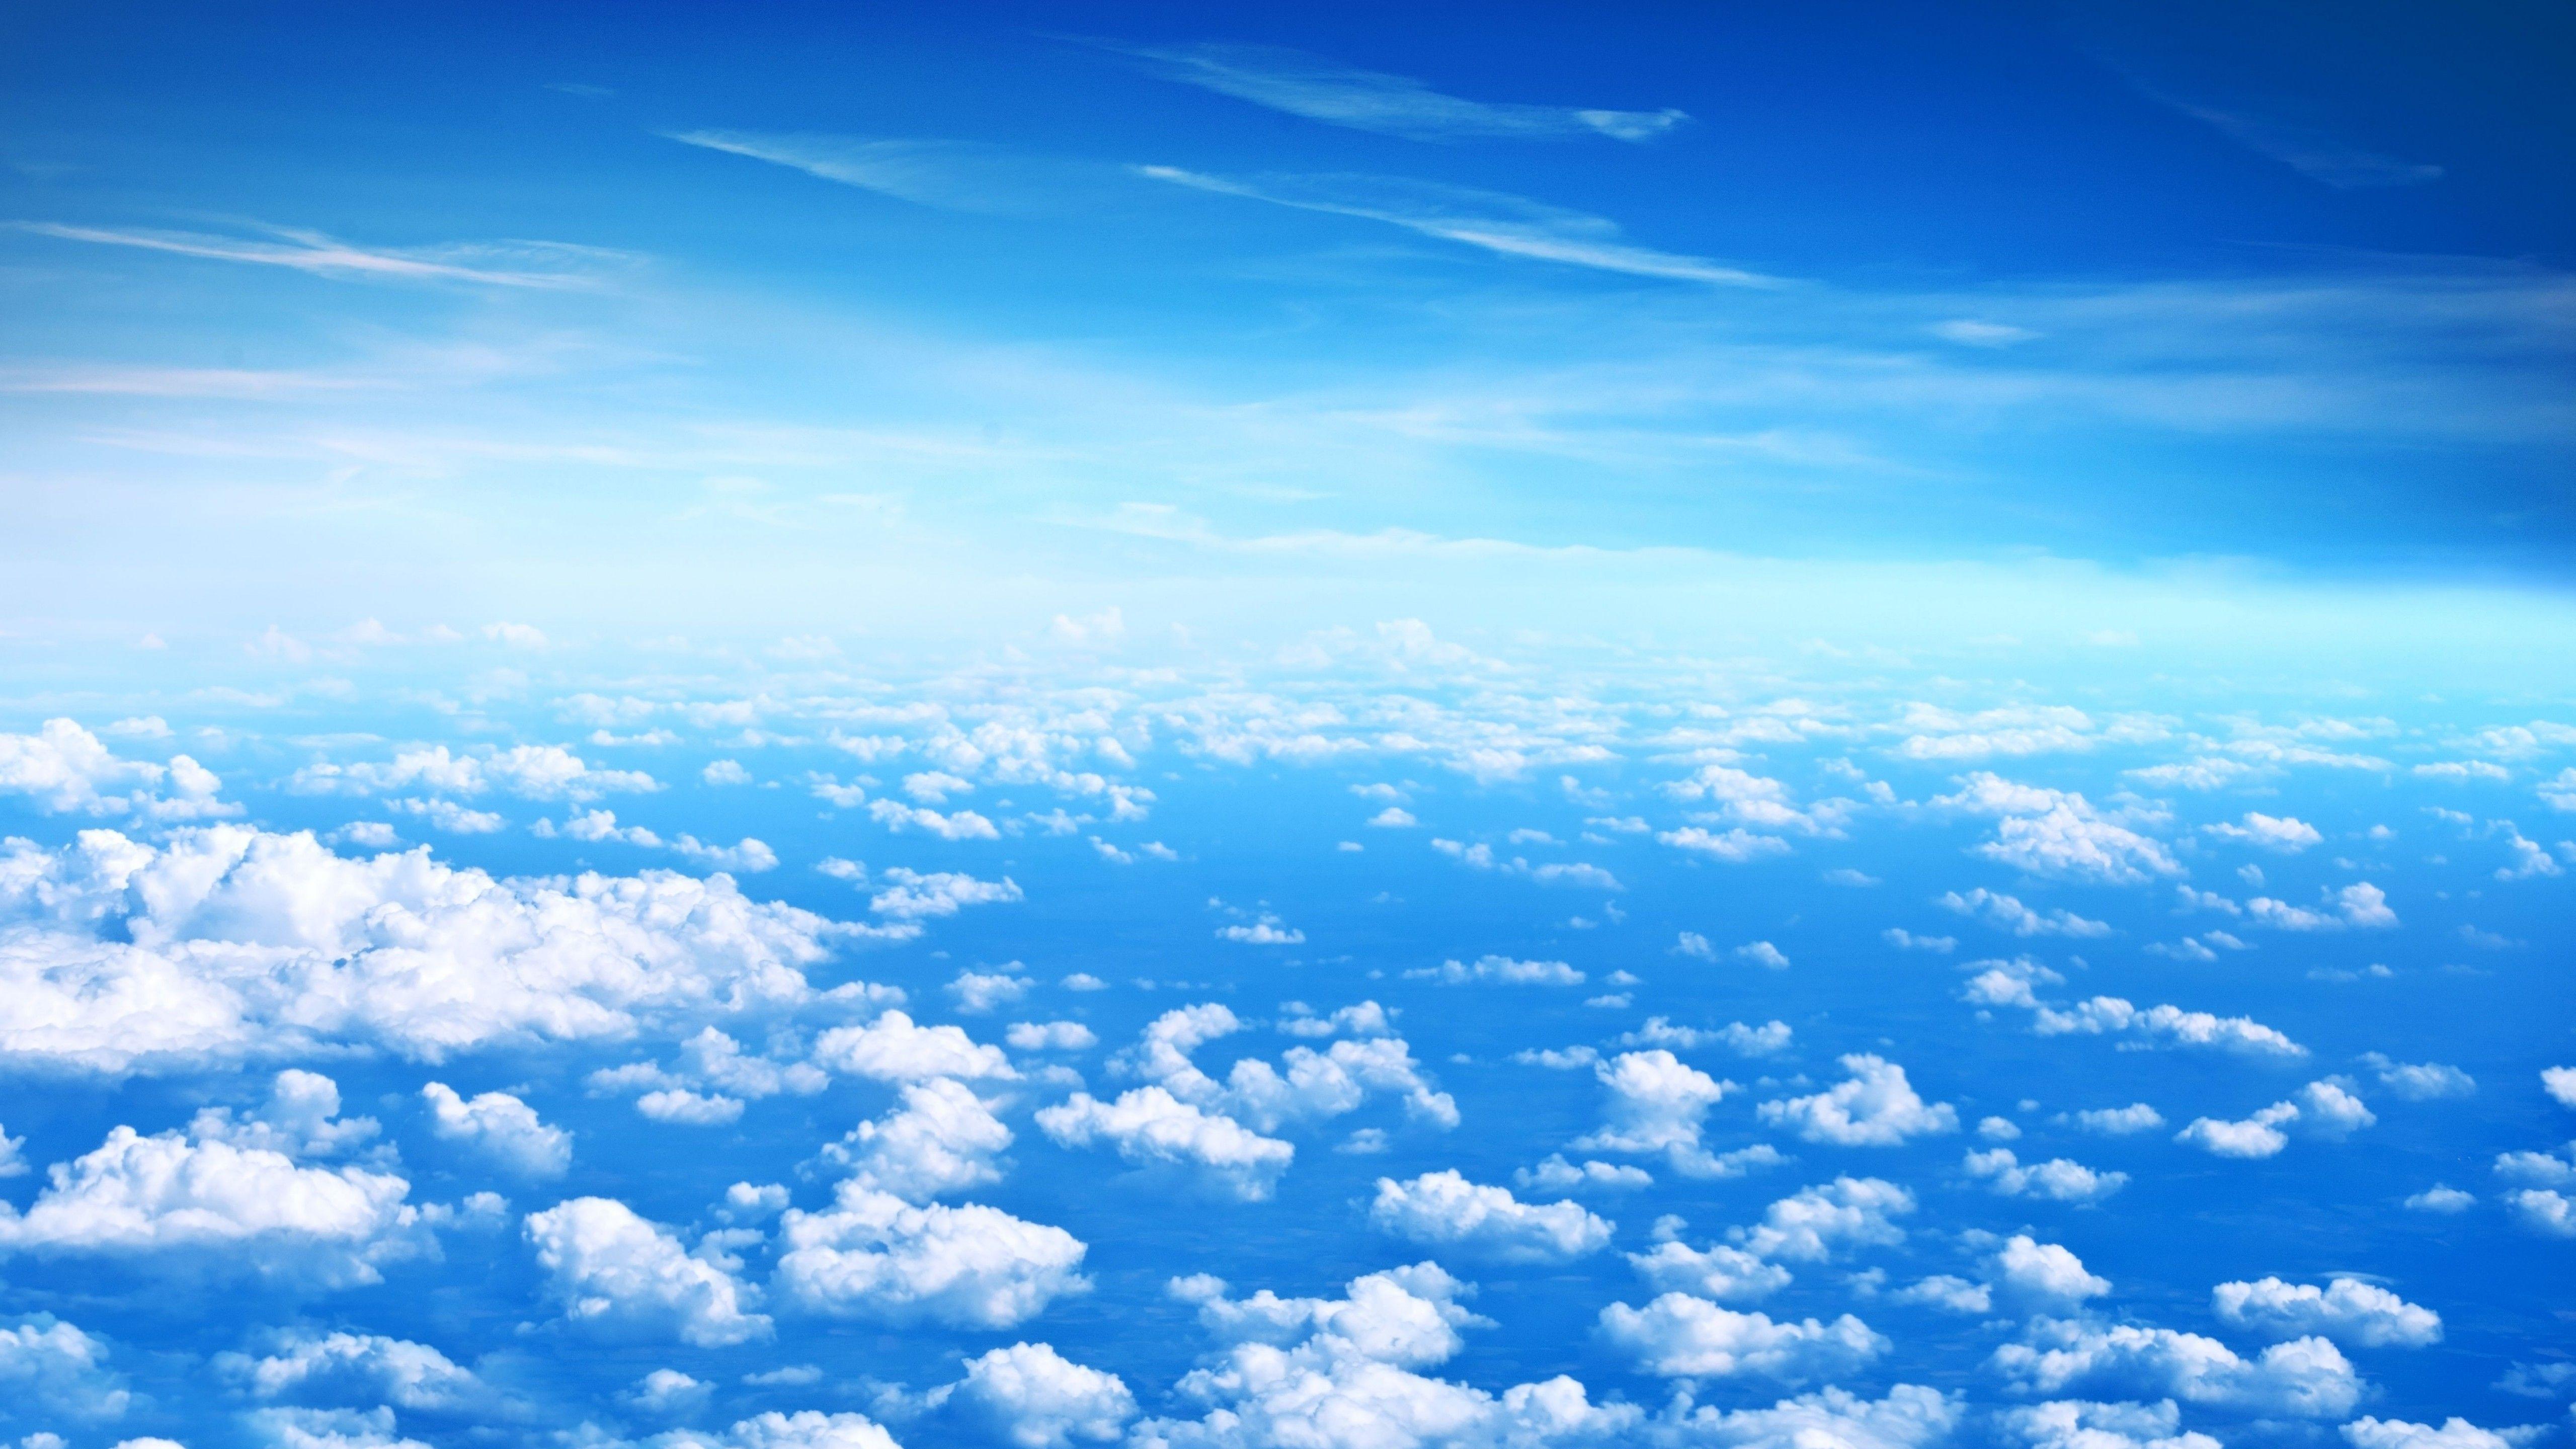 Sky And Clouds Wallpapers Top Free Sky And Clouds Backgrounds Wallpaperaccess